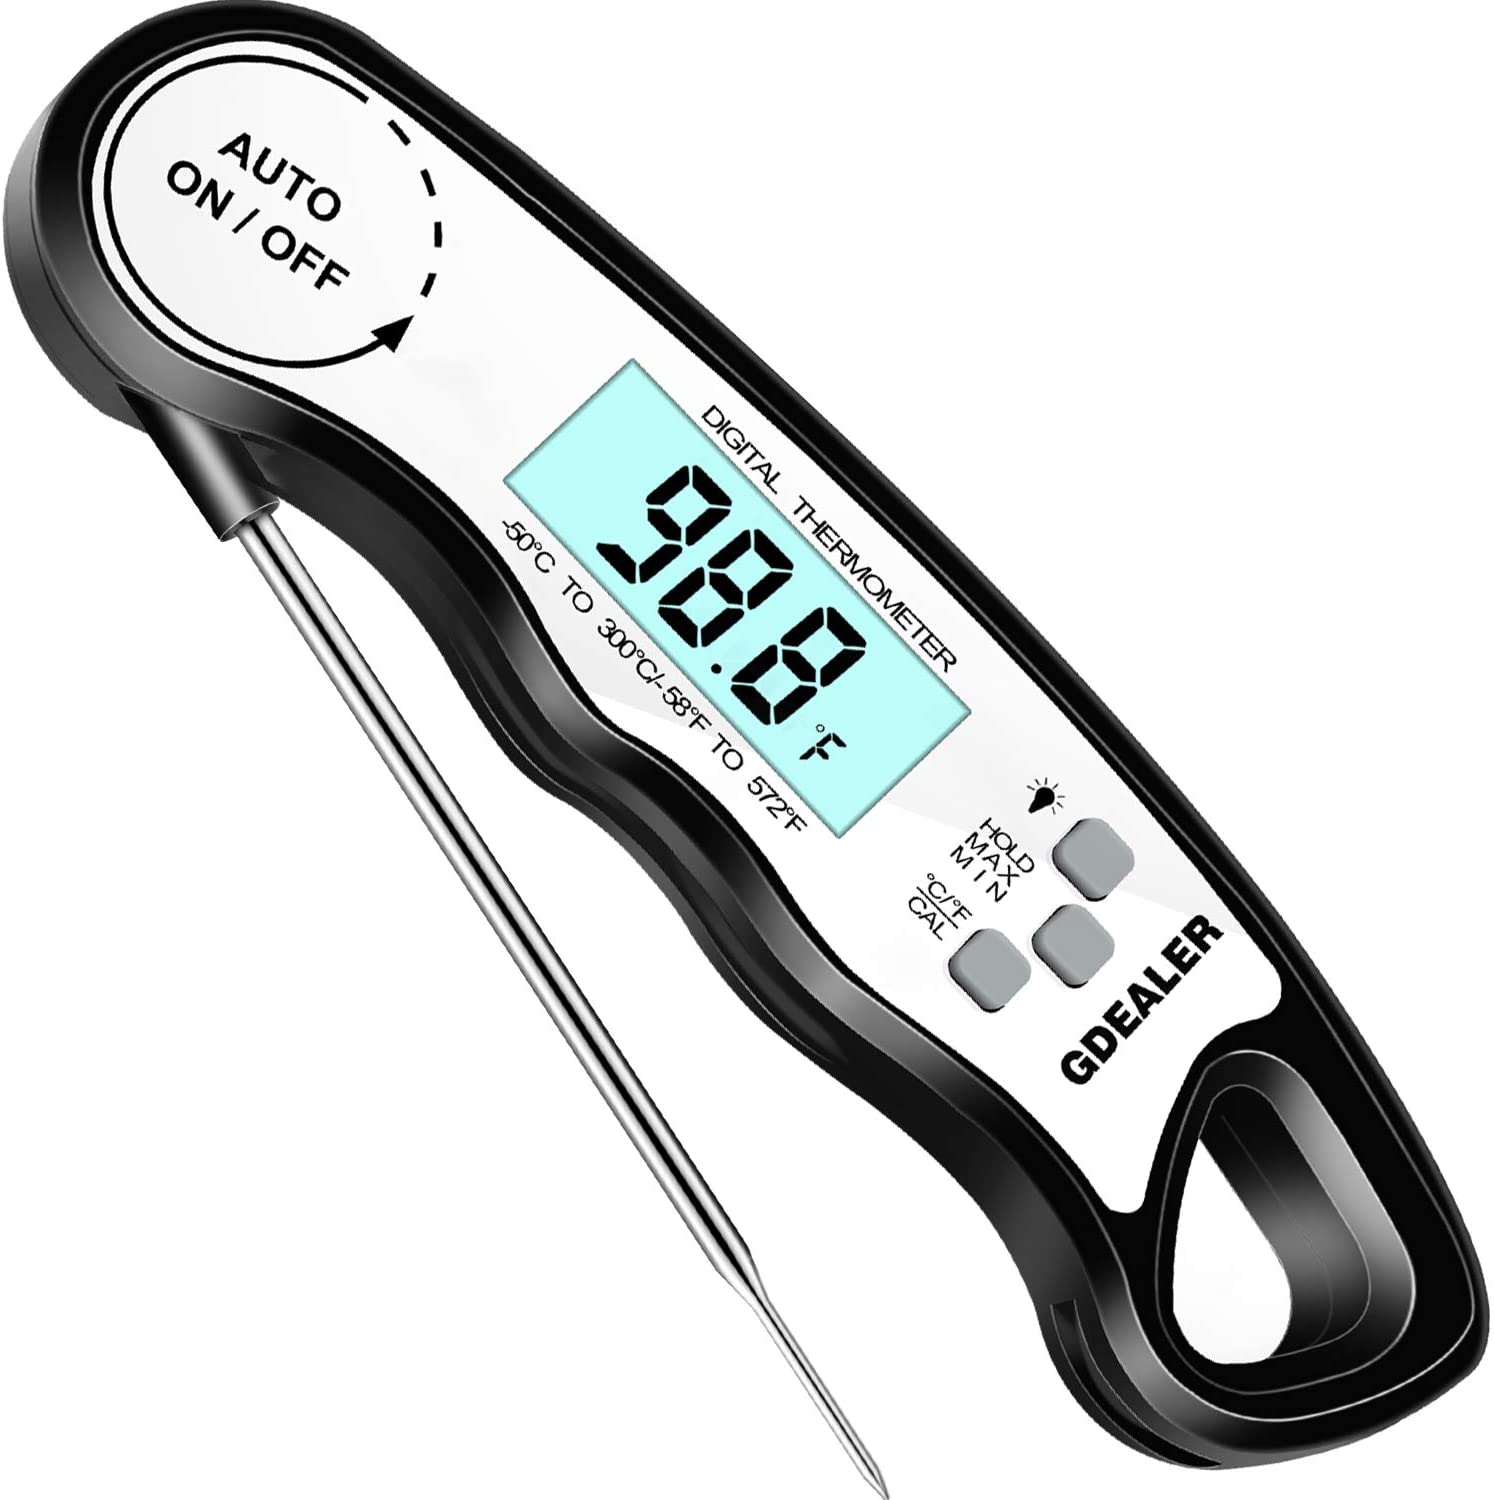 GDEALER DT6 Instant Read Meat Thermometer Waterproof Ultra Fast Digital Cooking Thermometer with Backlight & Calibration Food Thermometer for Kitchen BBQ Grill Smoker Oil Fry (Black White)